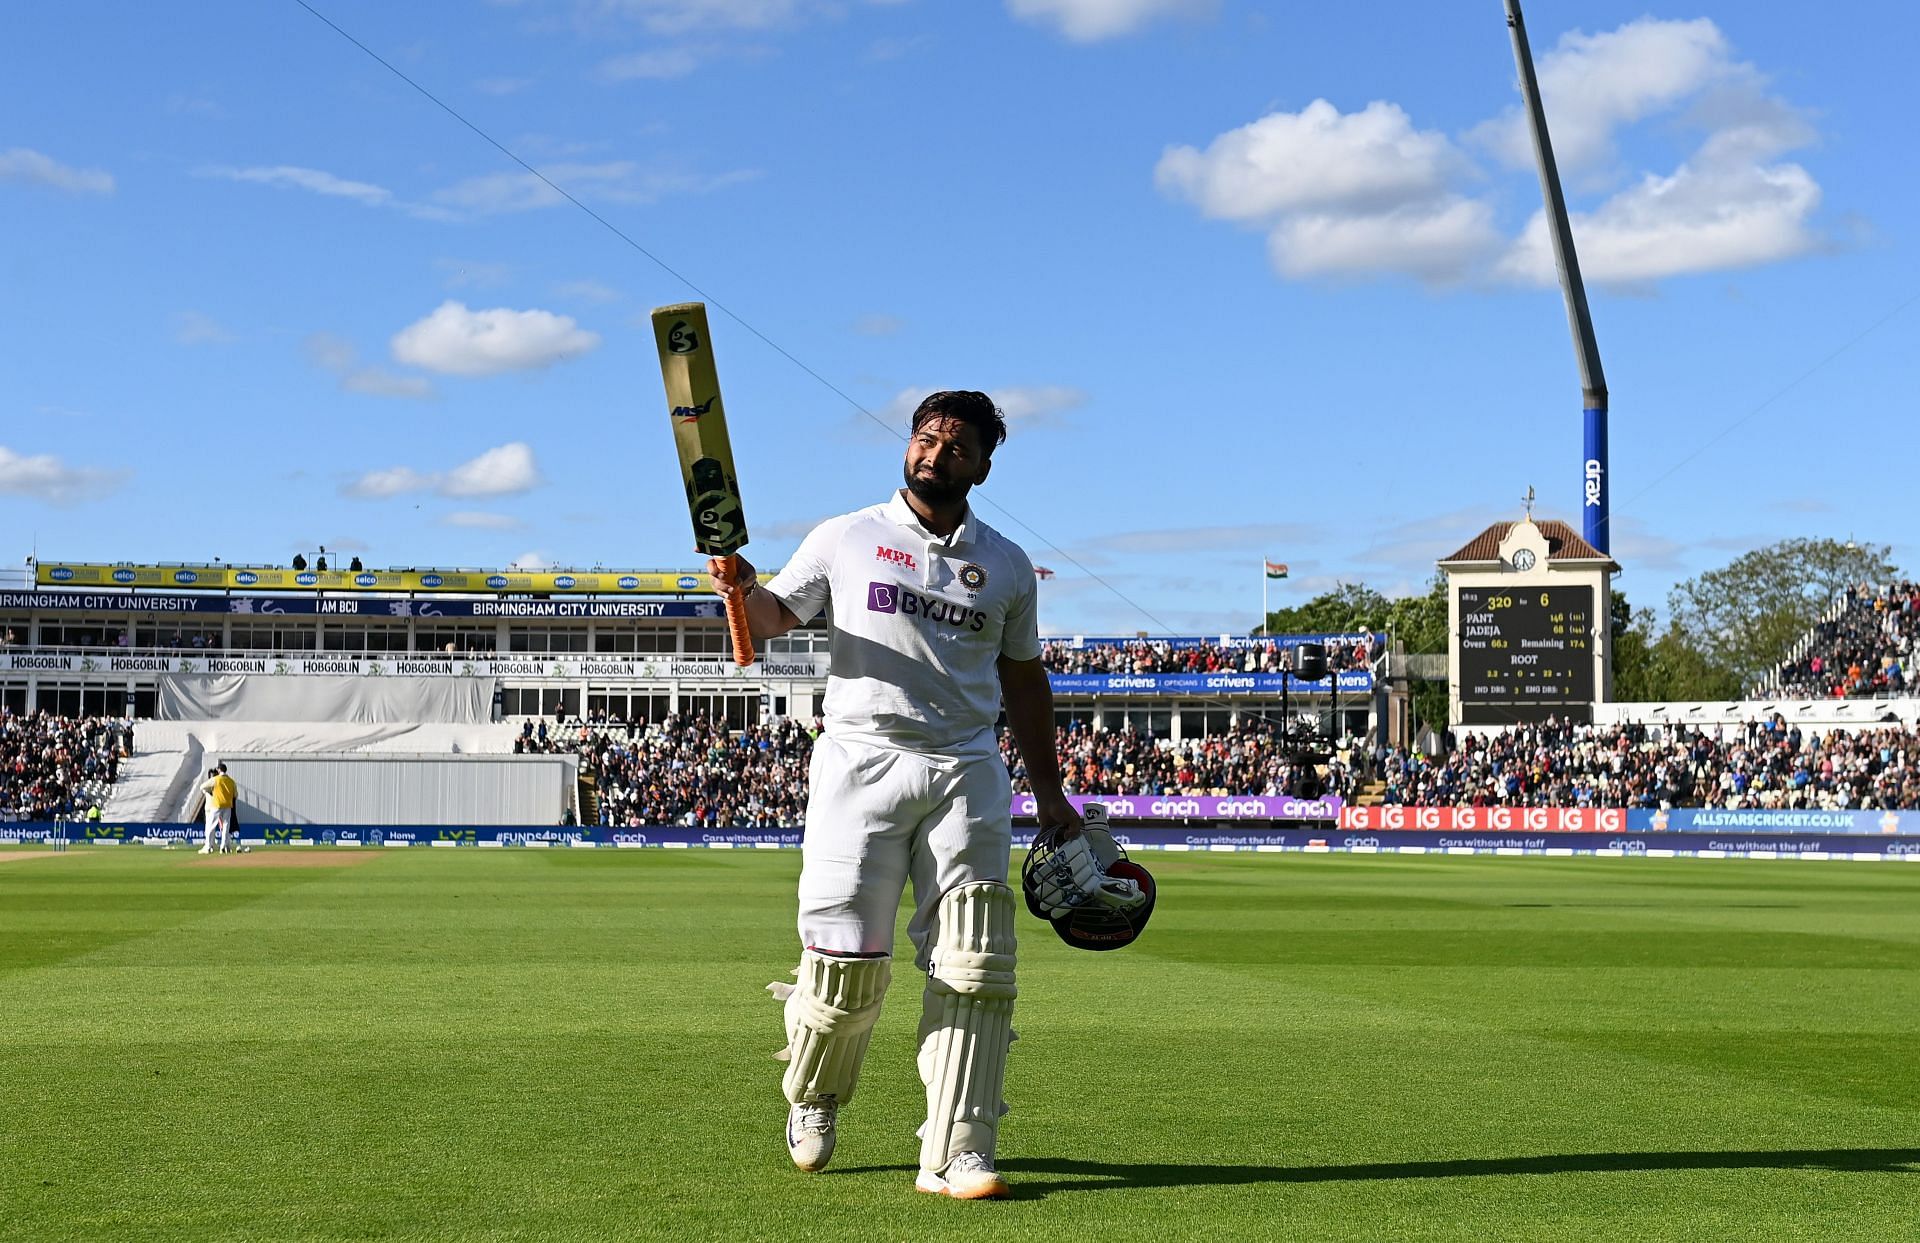 The Indian wicket-keeper was at his belligerent best at Edgbaston